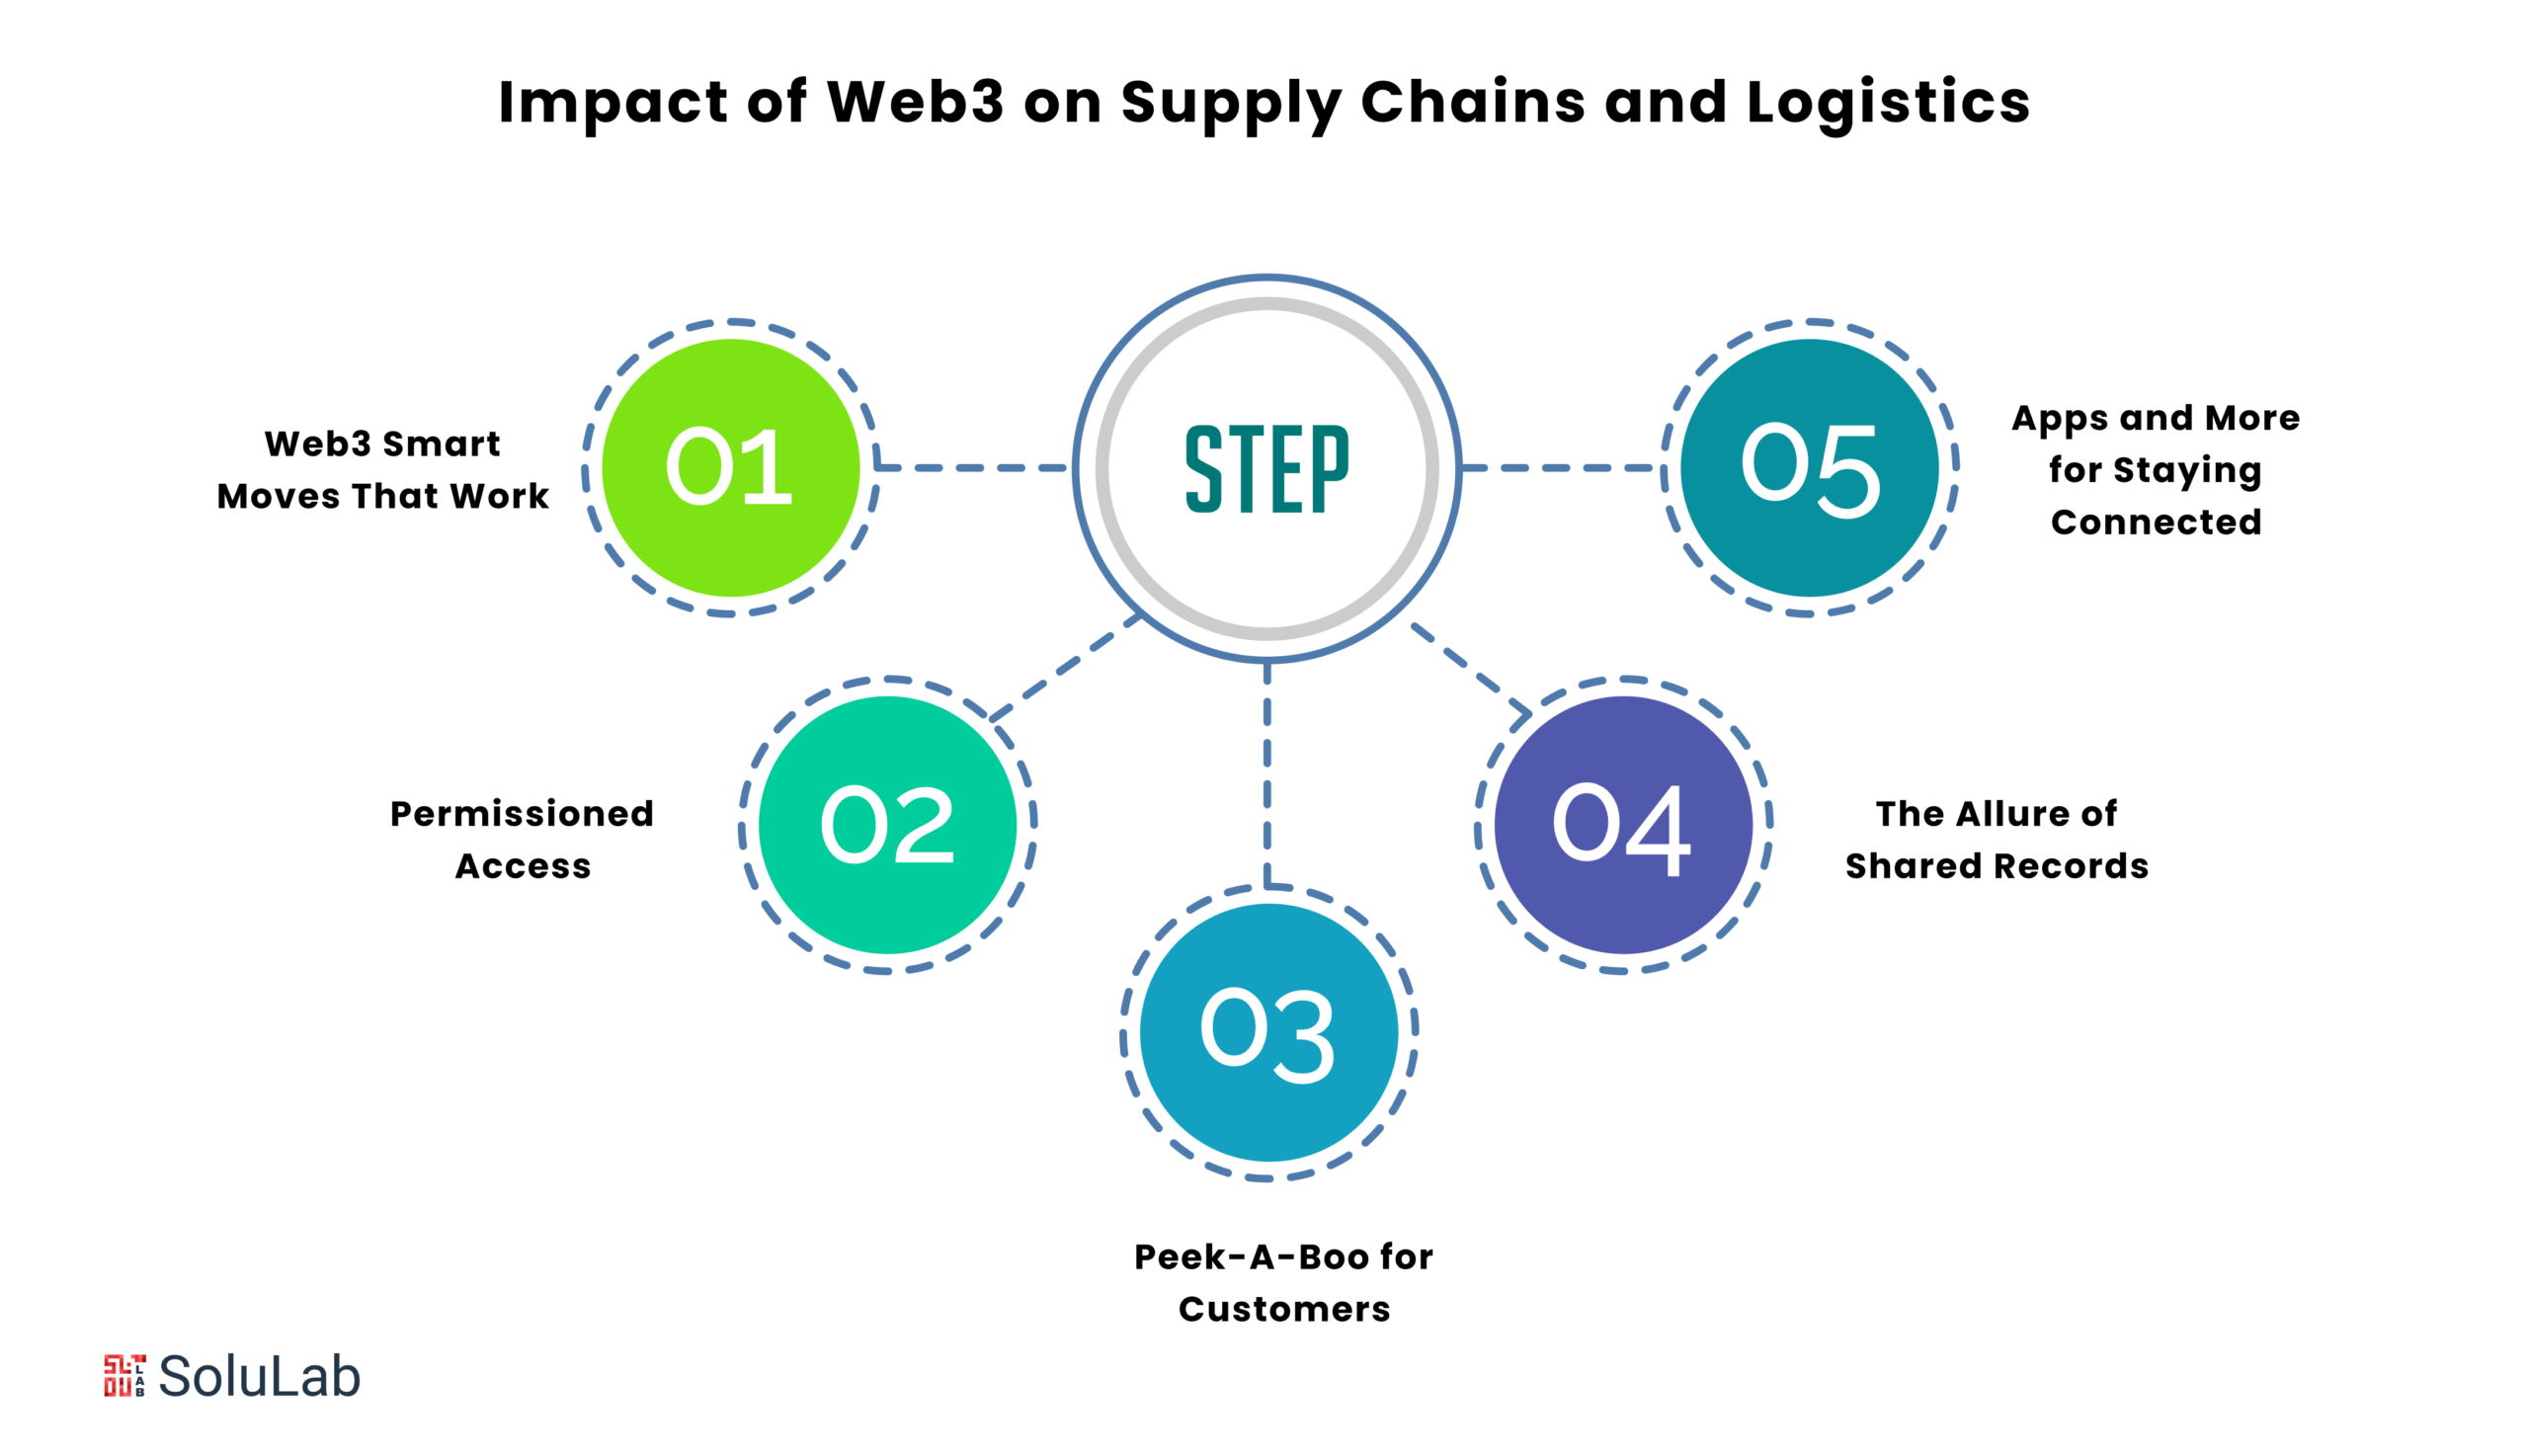 Impact of Web3 on Supply Chains and Logistics